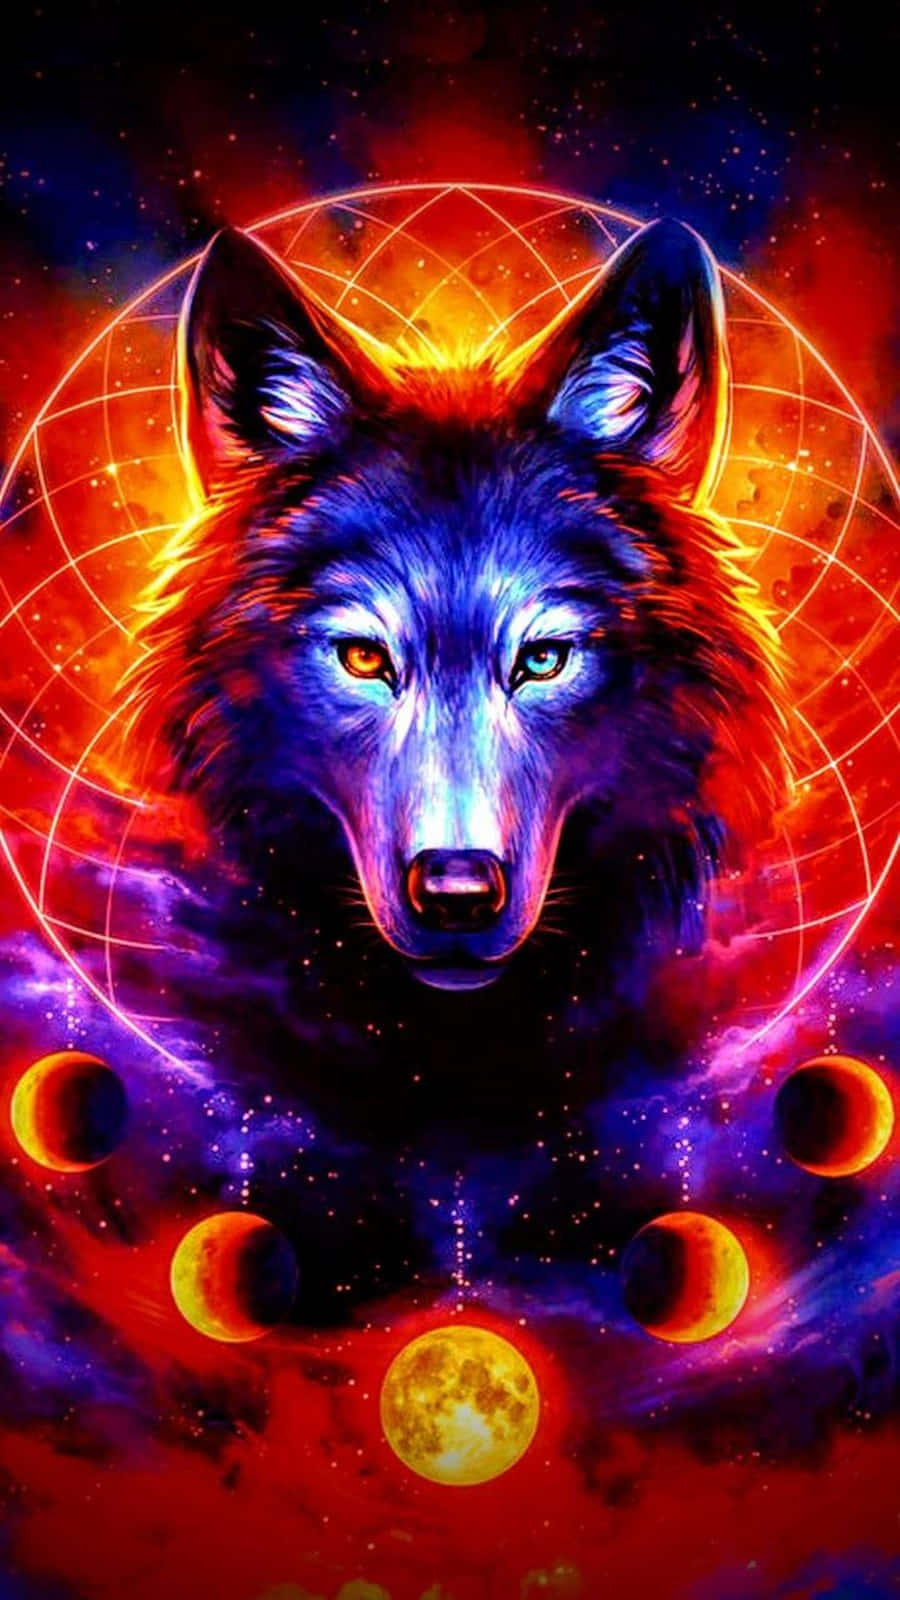 A Contemplative Red and Blue Wolf Wallpaper